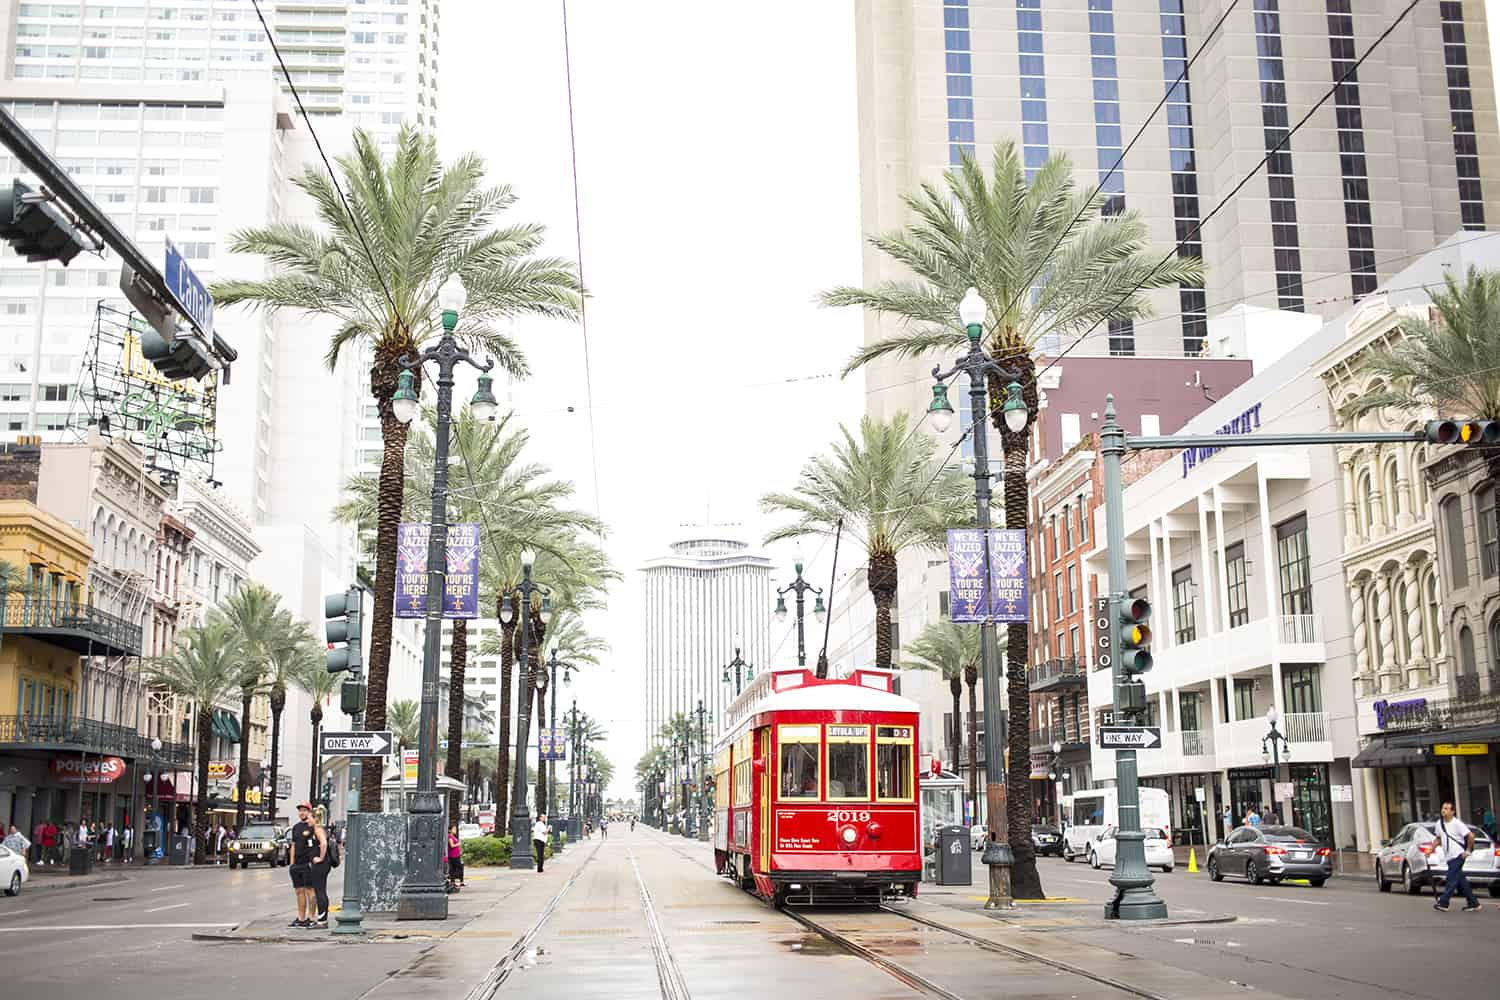 Ride A Streetcar on St. Charles Avenue